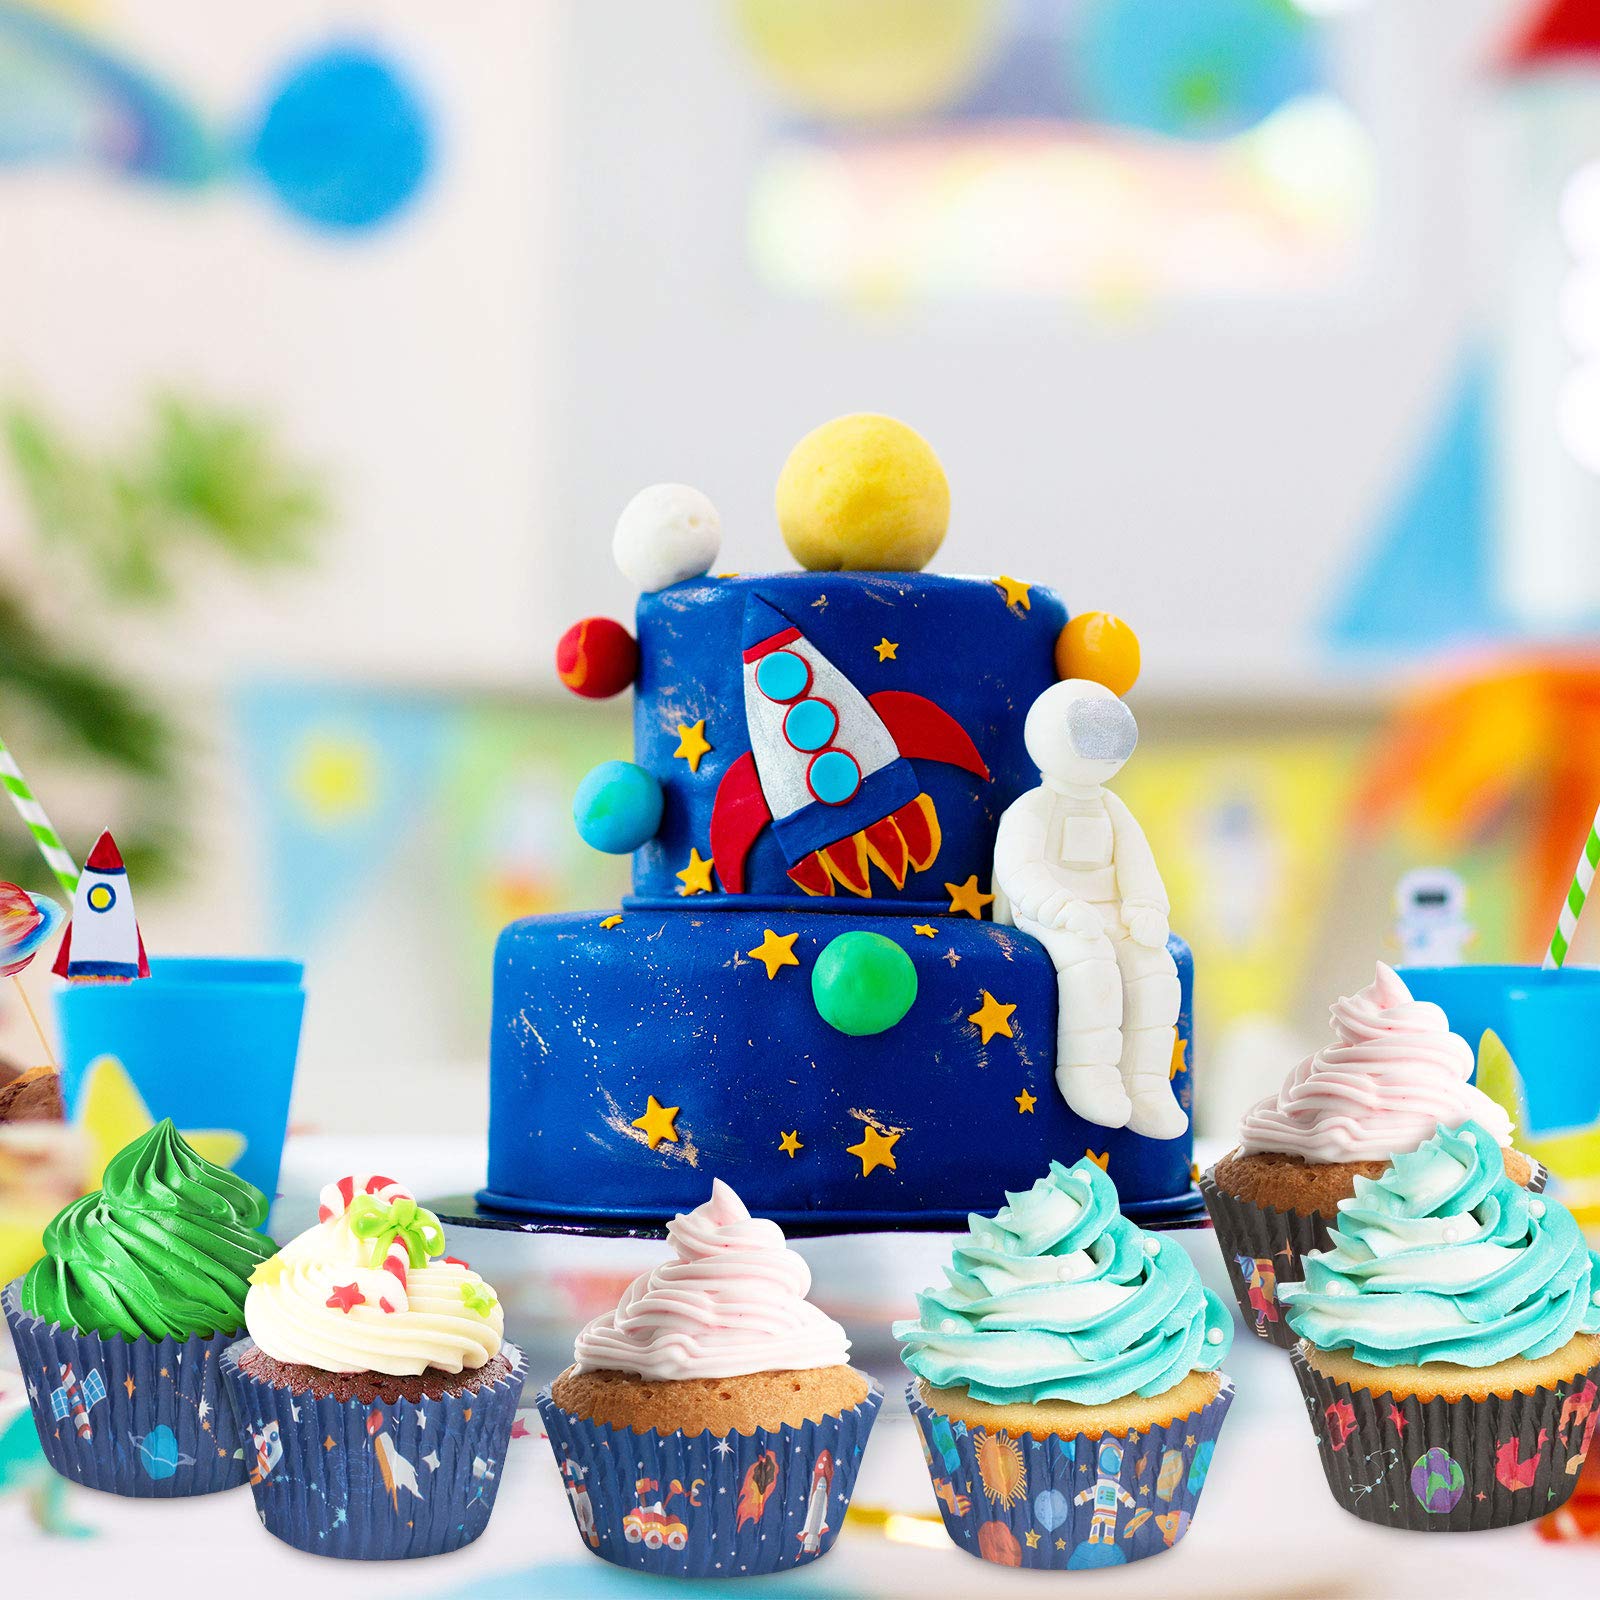 600 Pieces Space Adventure Cupcake Liners Outer Space Planet Rocket Astronaut Baking Cups Cupcake Wrappers Wraps Muffin Case Trays for Outer Space Theme Birthday Party Supplies